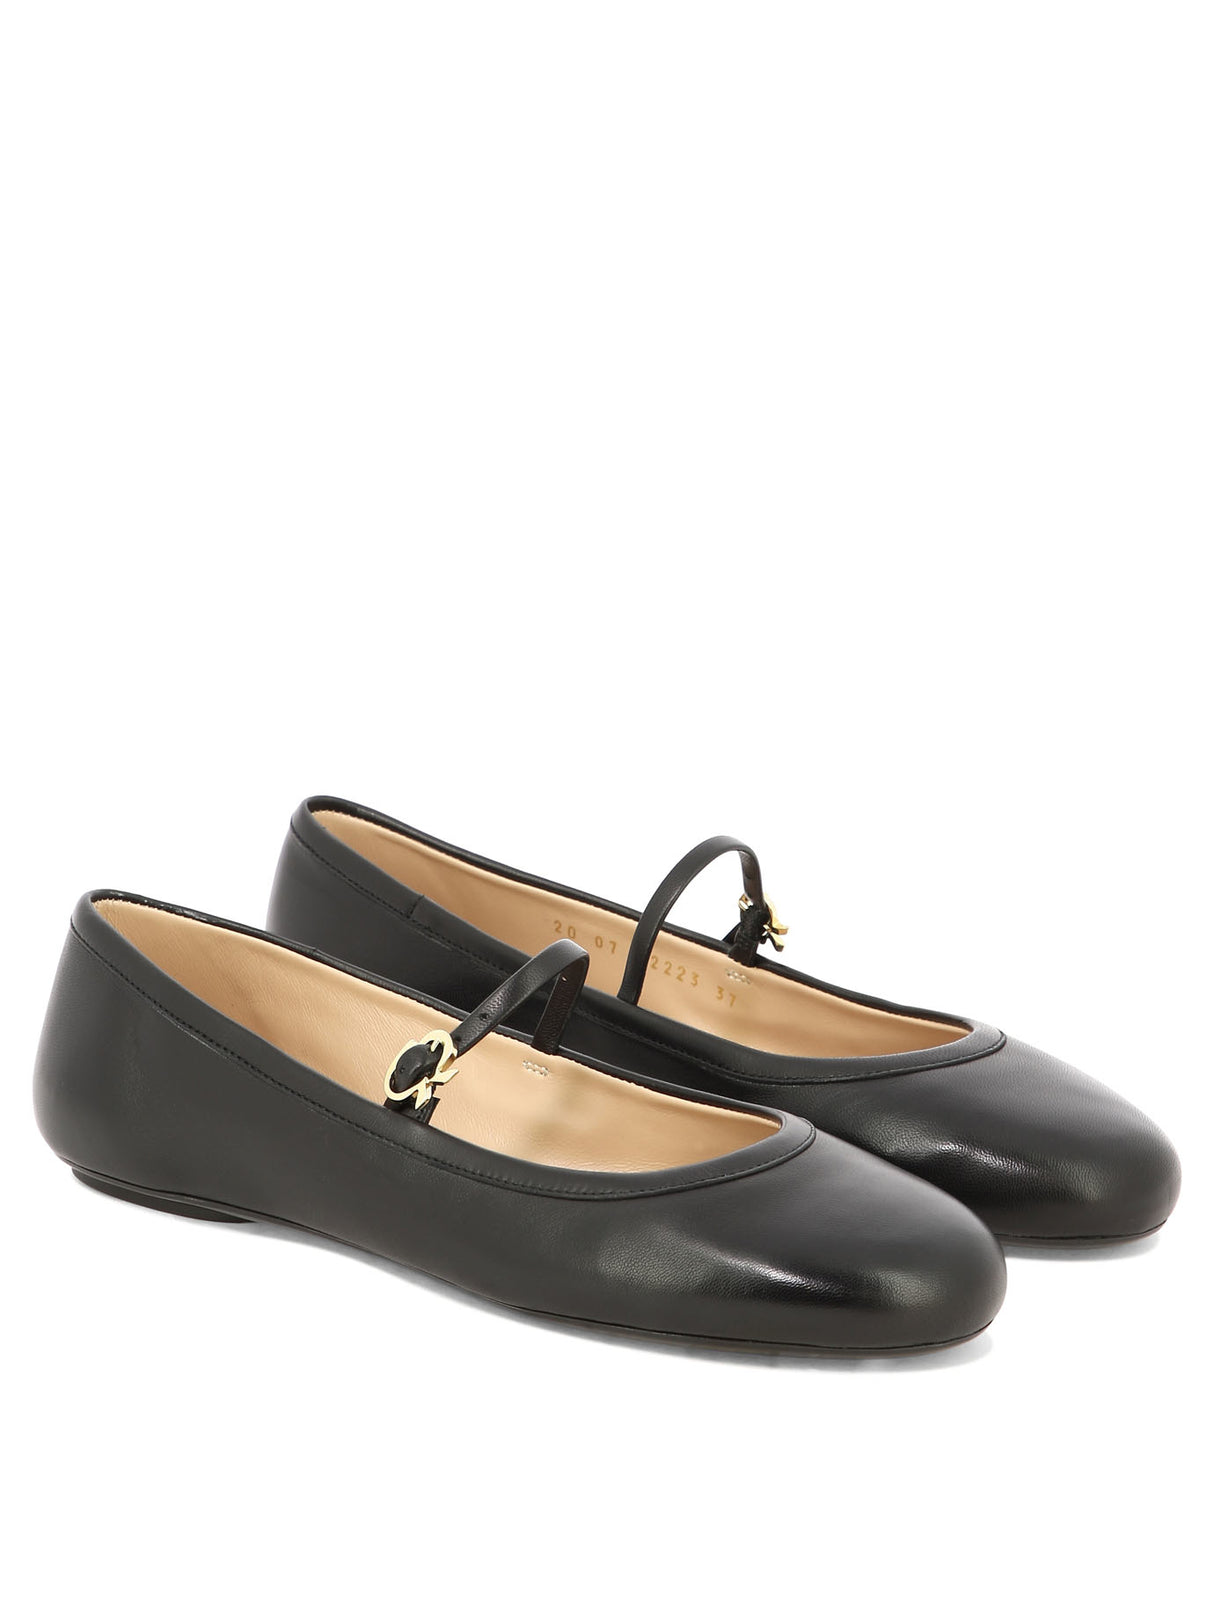 GIANVITO ROSSI Classic Black Ballet Flats for Women - FW24 Collection